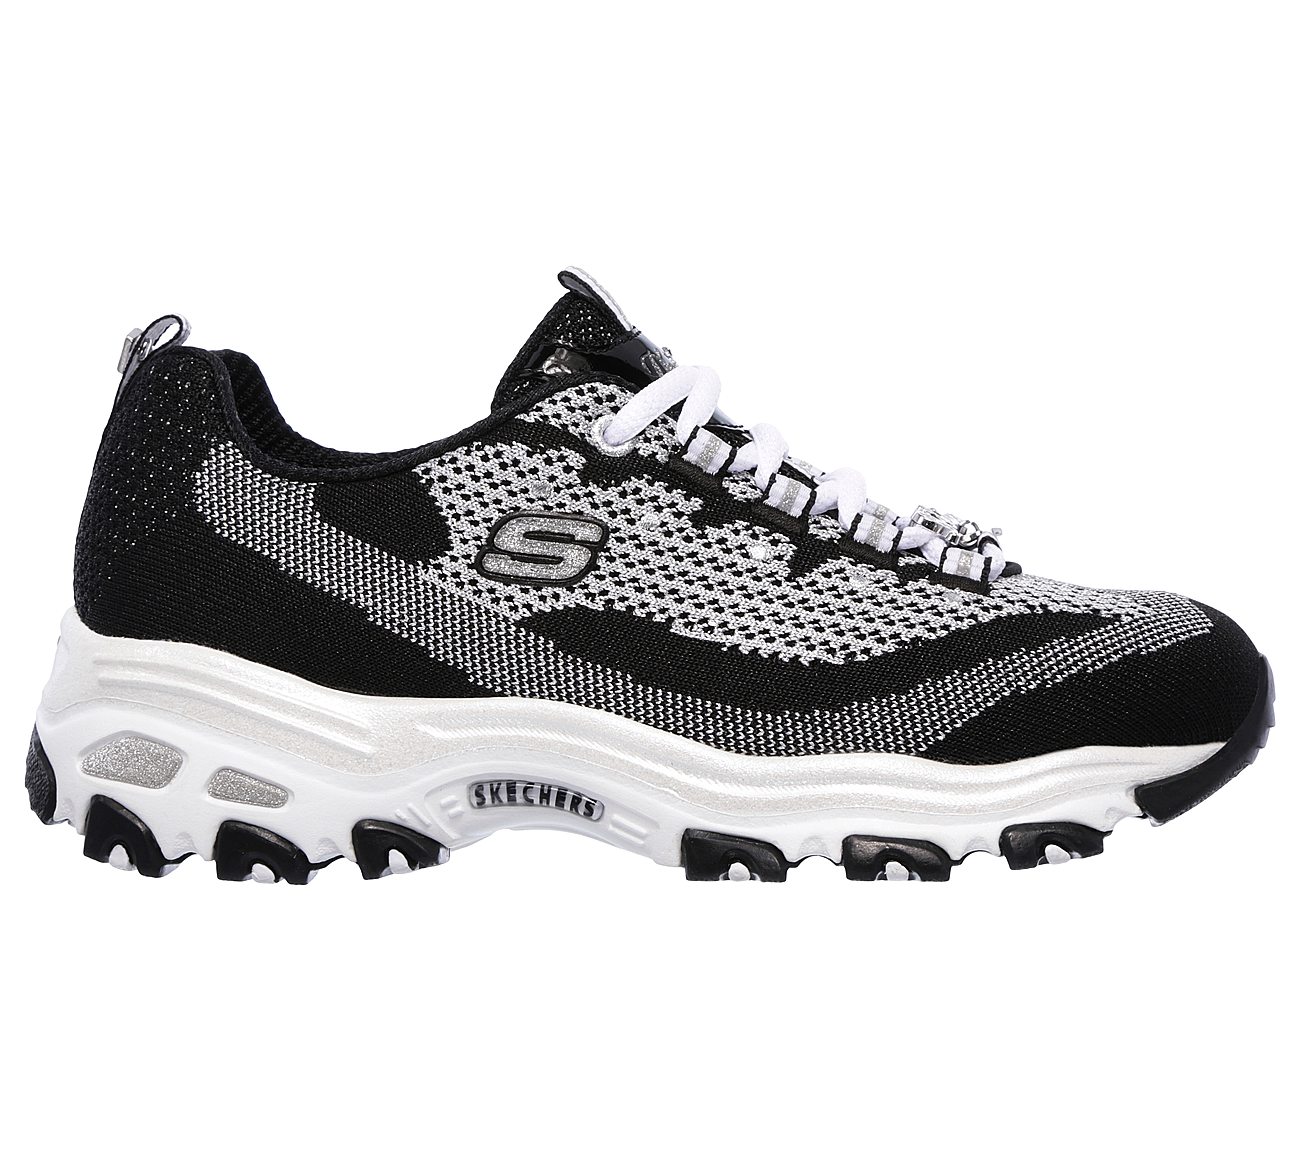 Buy SKECHERS D'Lites - Shiny and New D'Lites Shoes